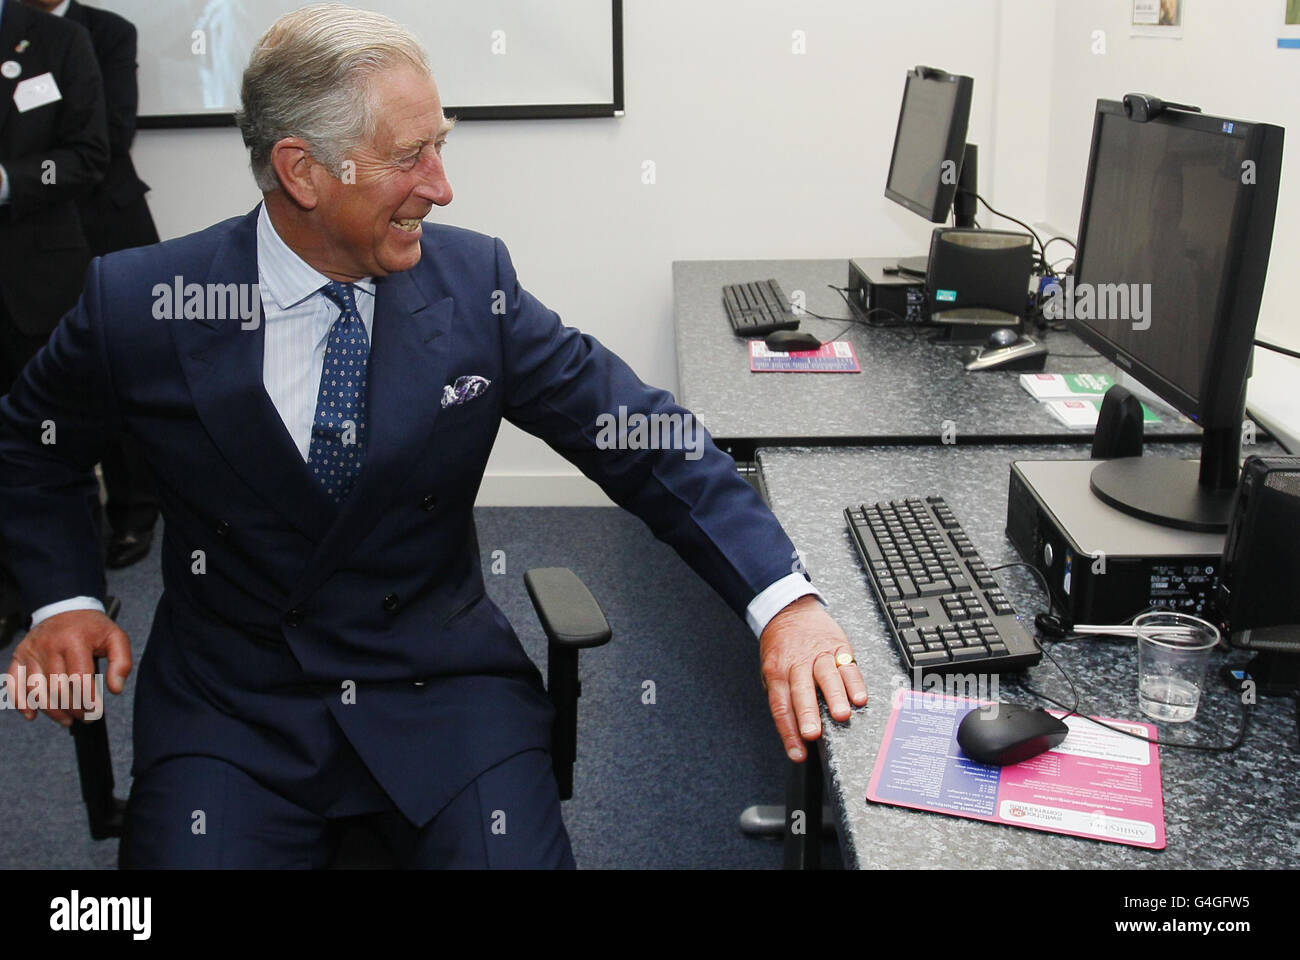 The Prince of Wales tries his hand at using 'Skype' for a video call on a computer, at Tavis House in London. Stock Photo